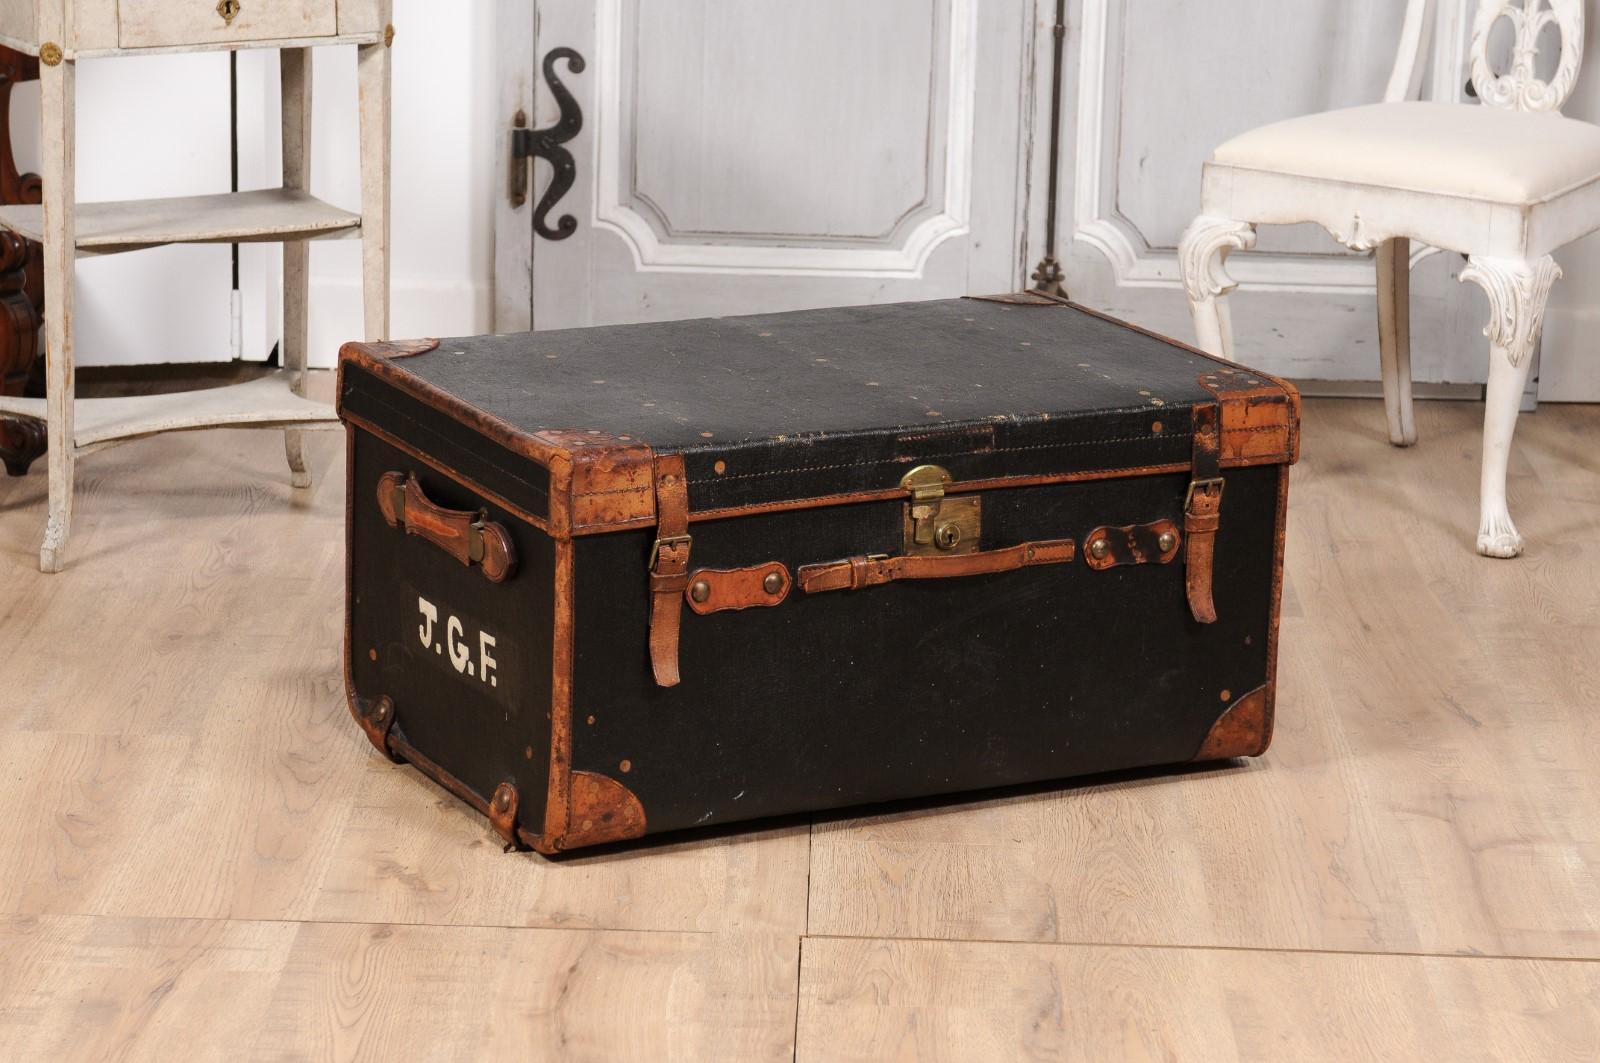 English Victorian Period 19th Century Black Traveling Trunk With Initials J.G.F. In Good Condition For Sale In Atlanta, GA